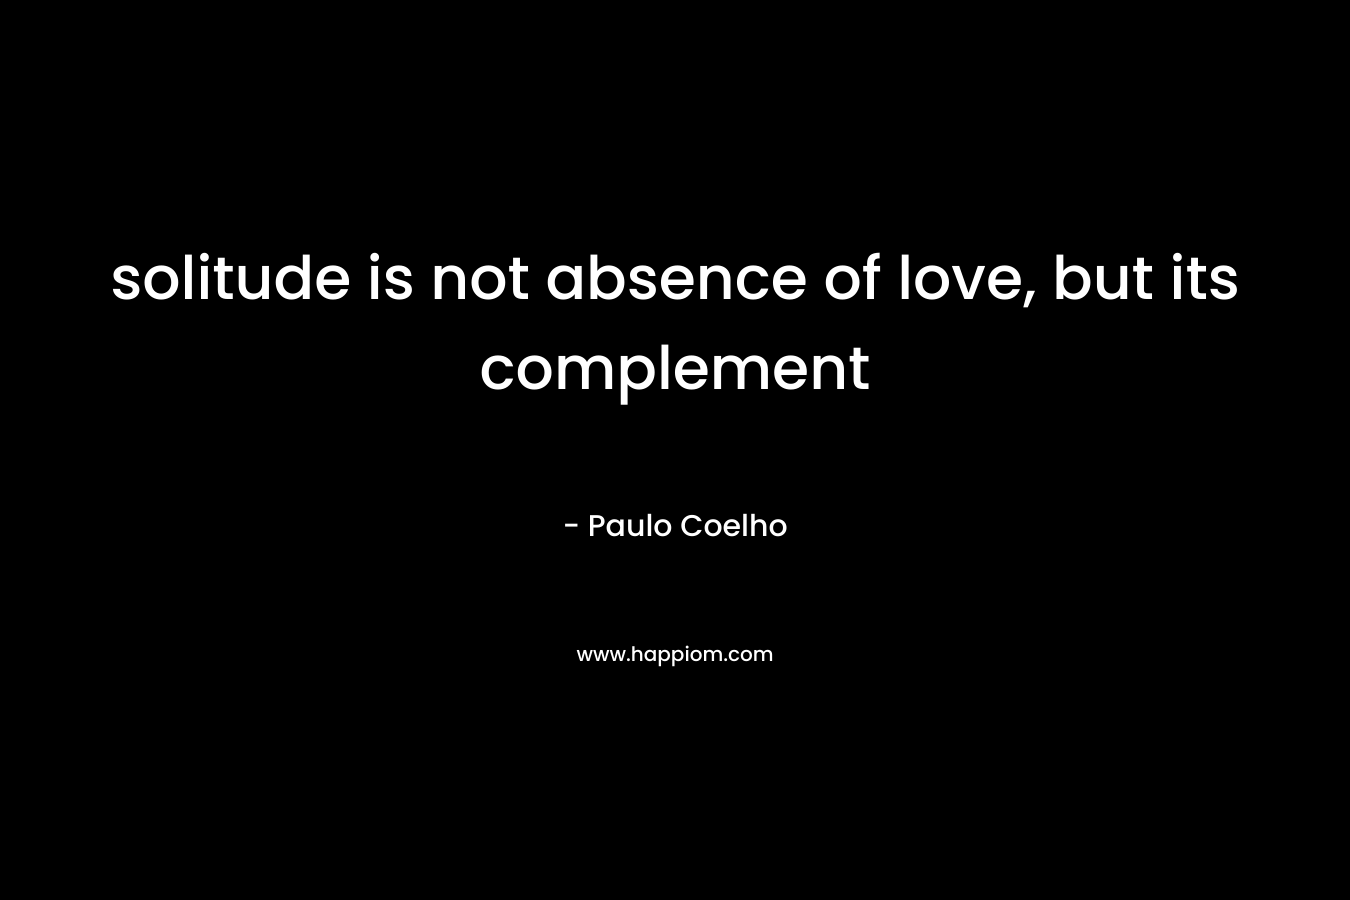 solitude is not absence of love, but its complement – Paulo Coelho